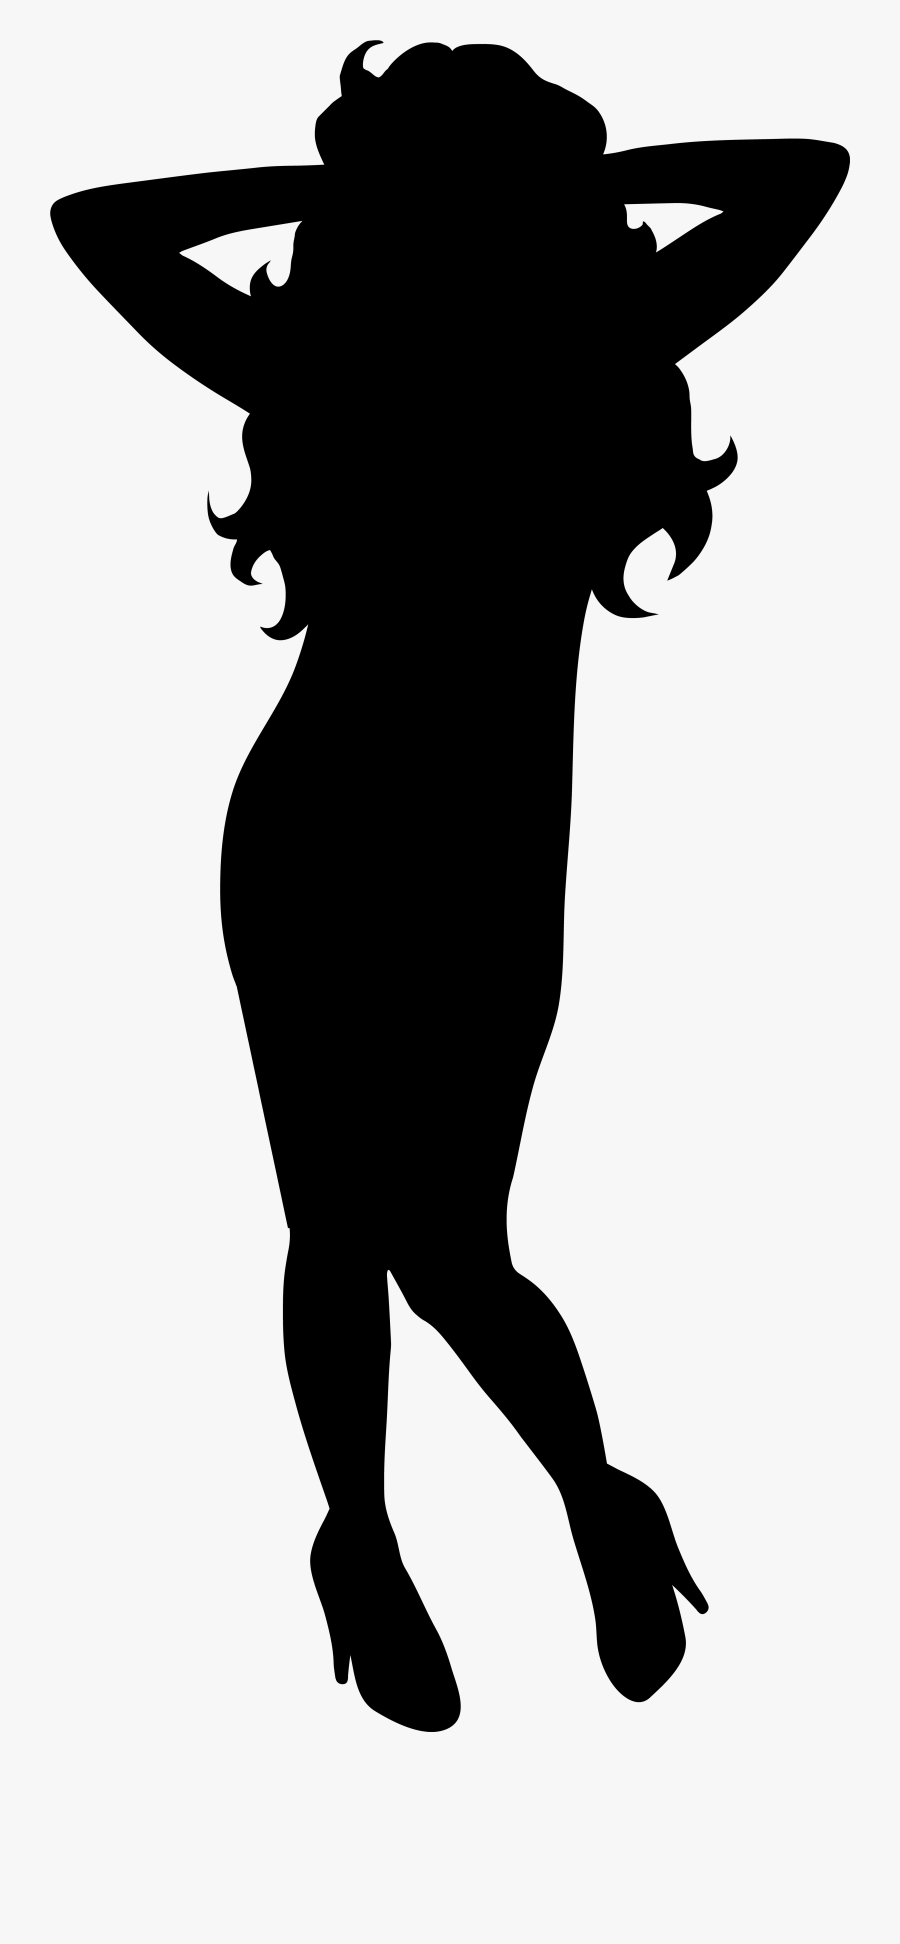 Woman Silhouette 03 - Dancing Woman Silhouette Png, Transparent Clipart